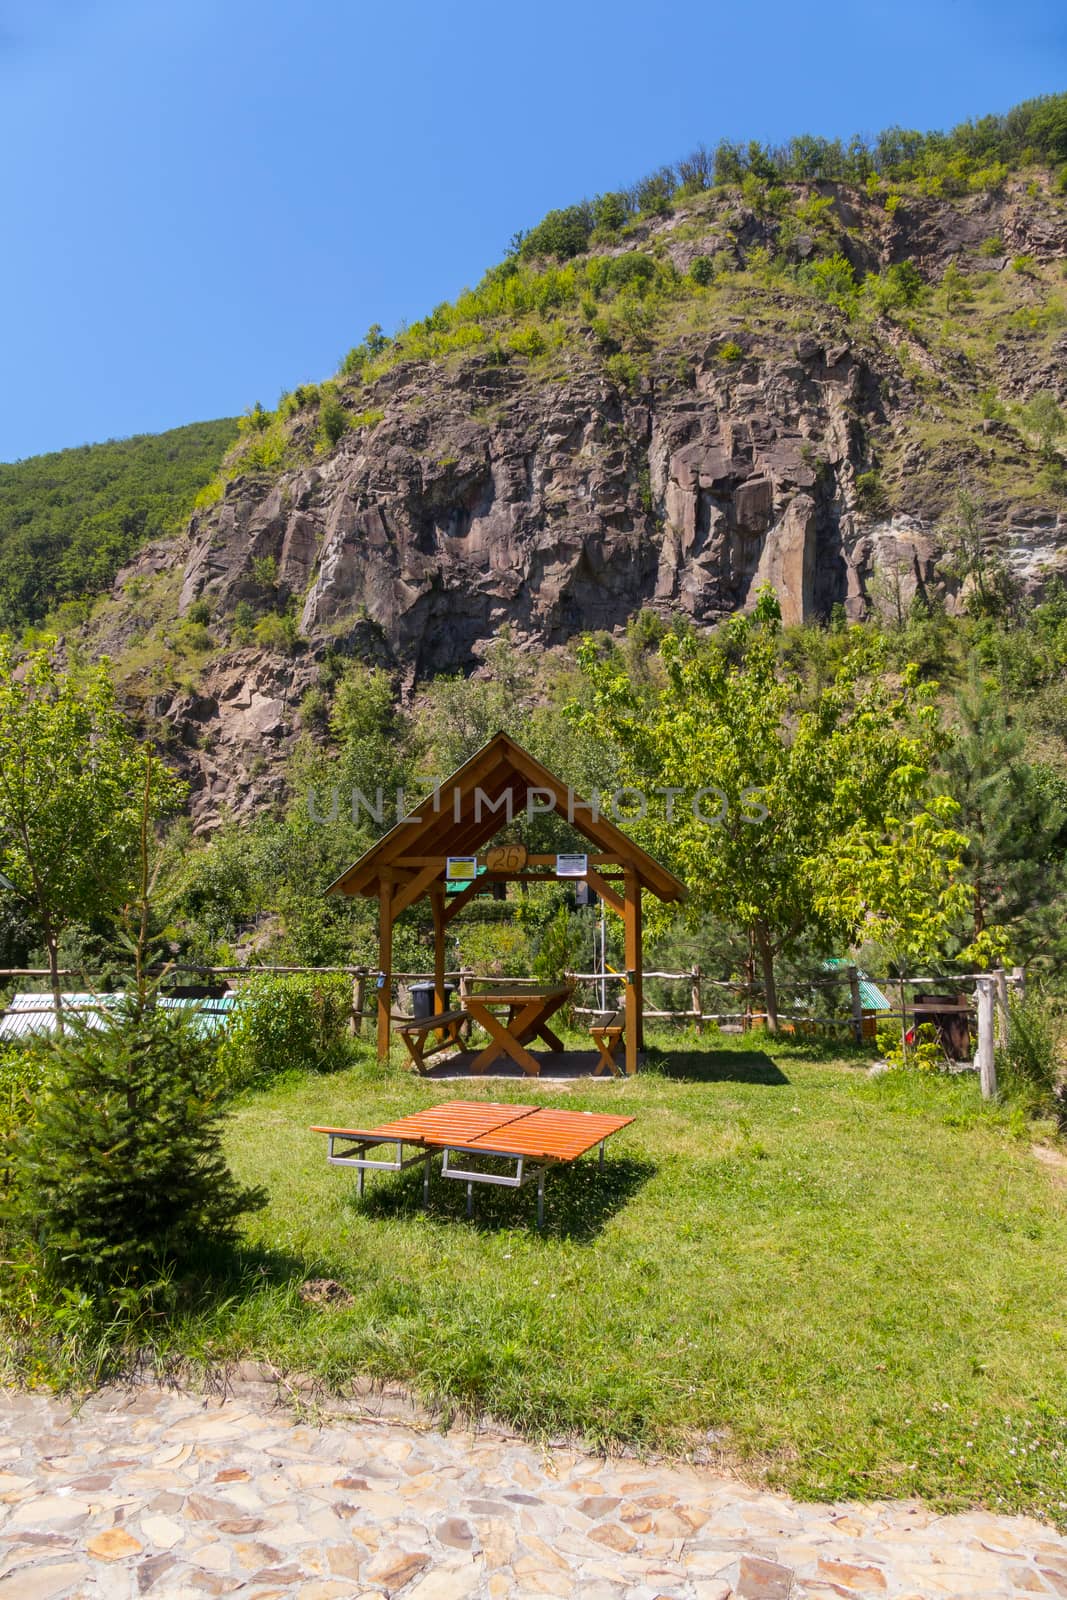 Green recreation area with gazebo and sun beds against the backdrop of a rocky mountain